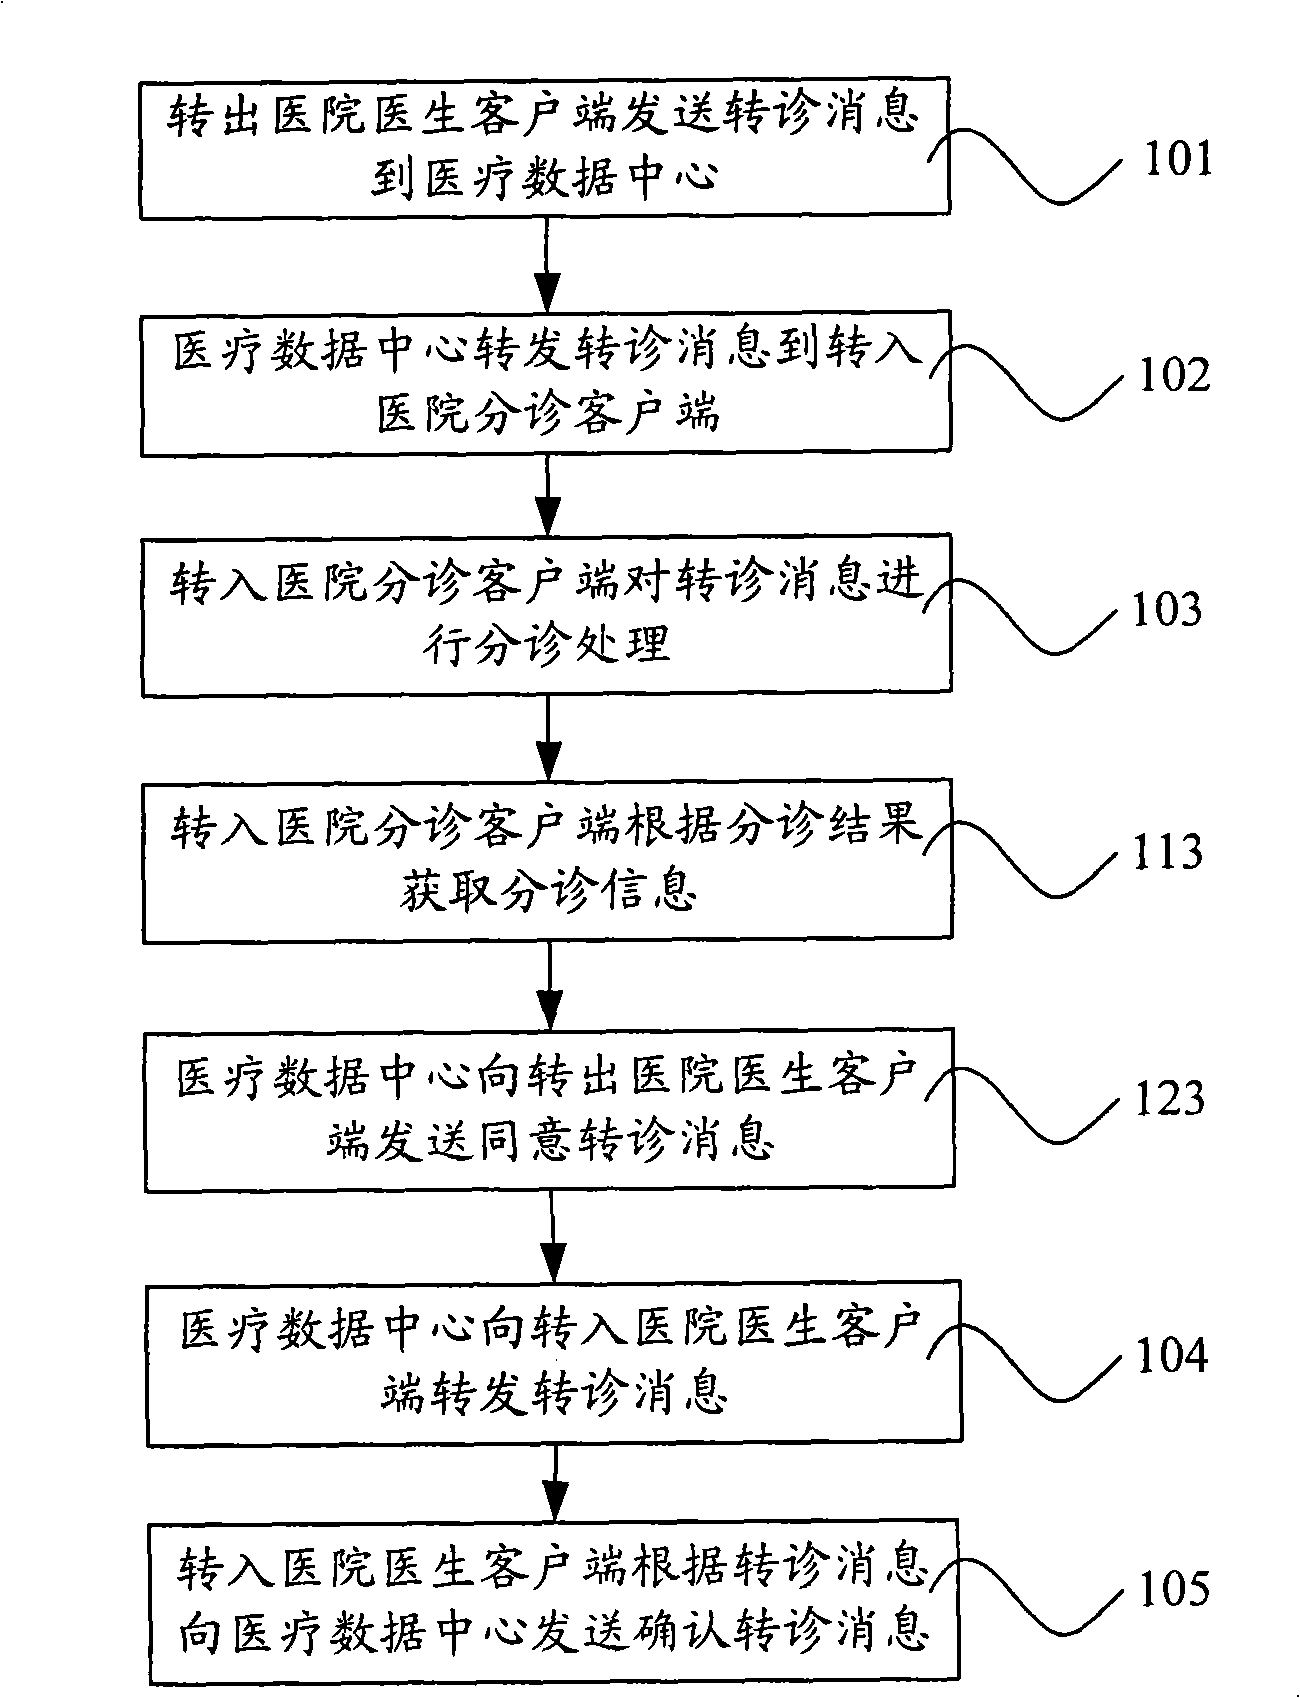 Method and system for bidirectionally transfering consultation